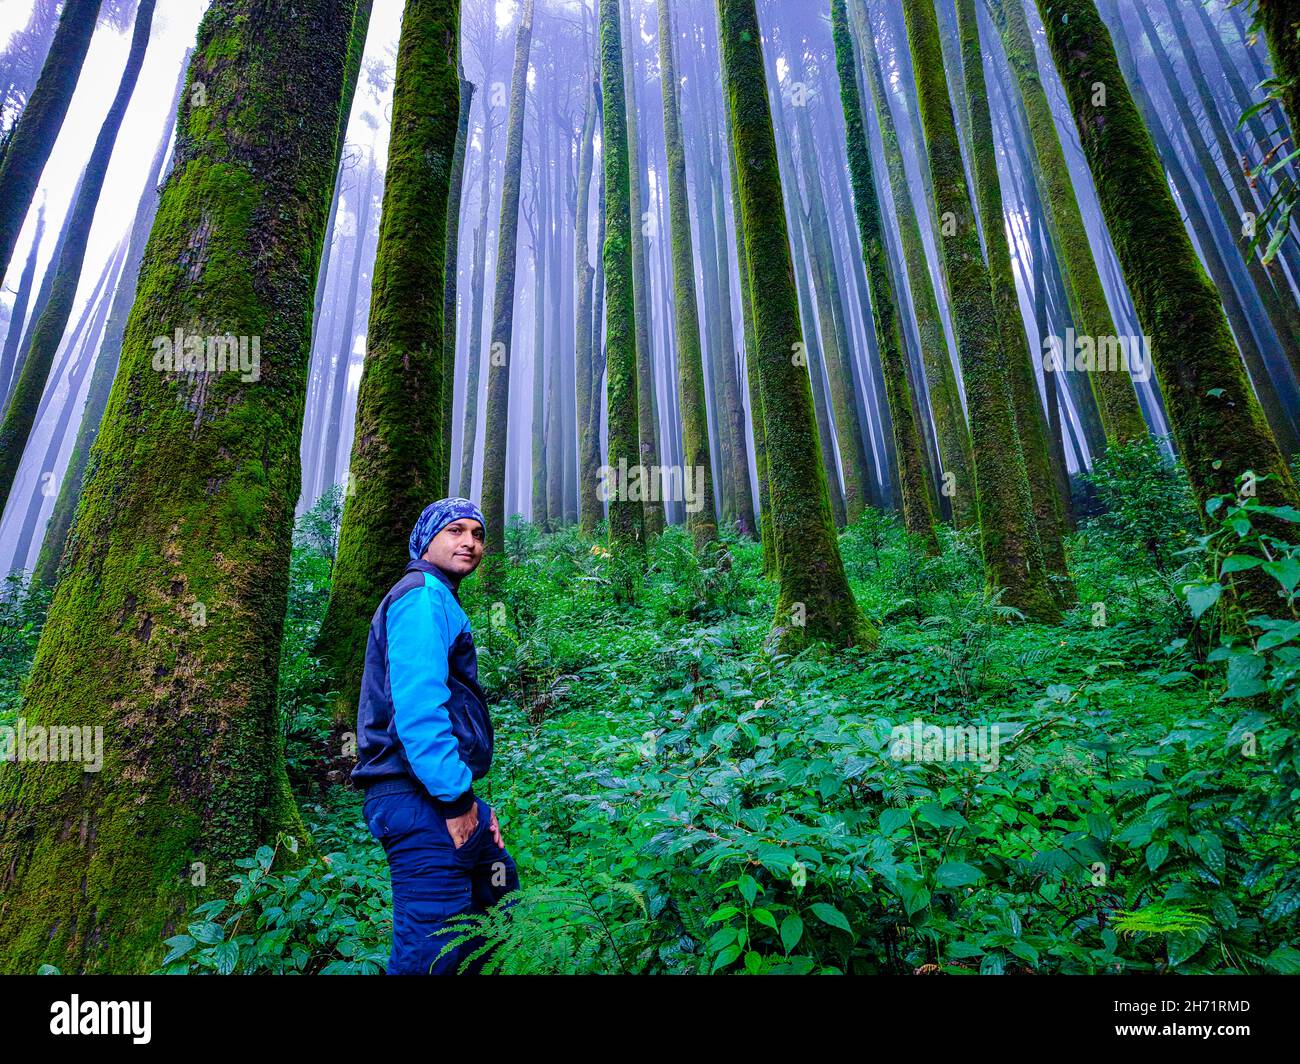 young man hiker at pine tree forest with white defused fog background at morning image is taken at mirik forests darjeeling west bengal india. Stock Photo